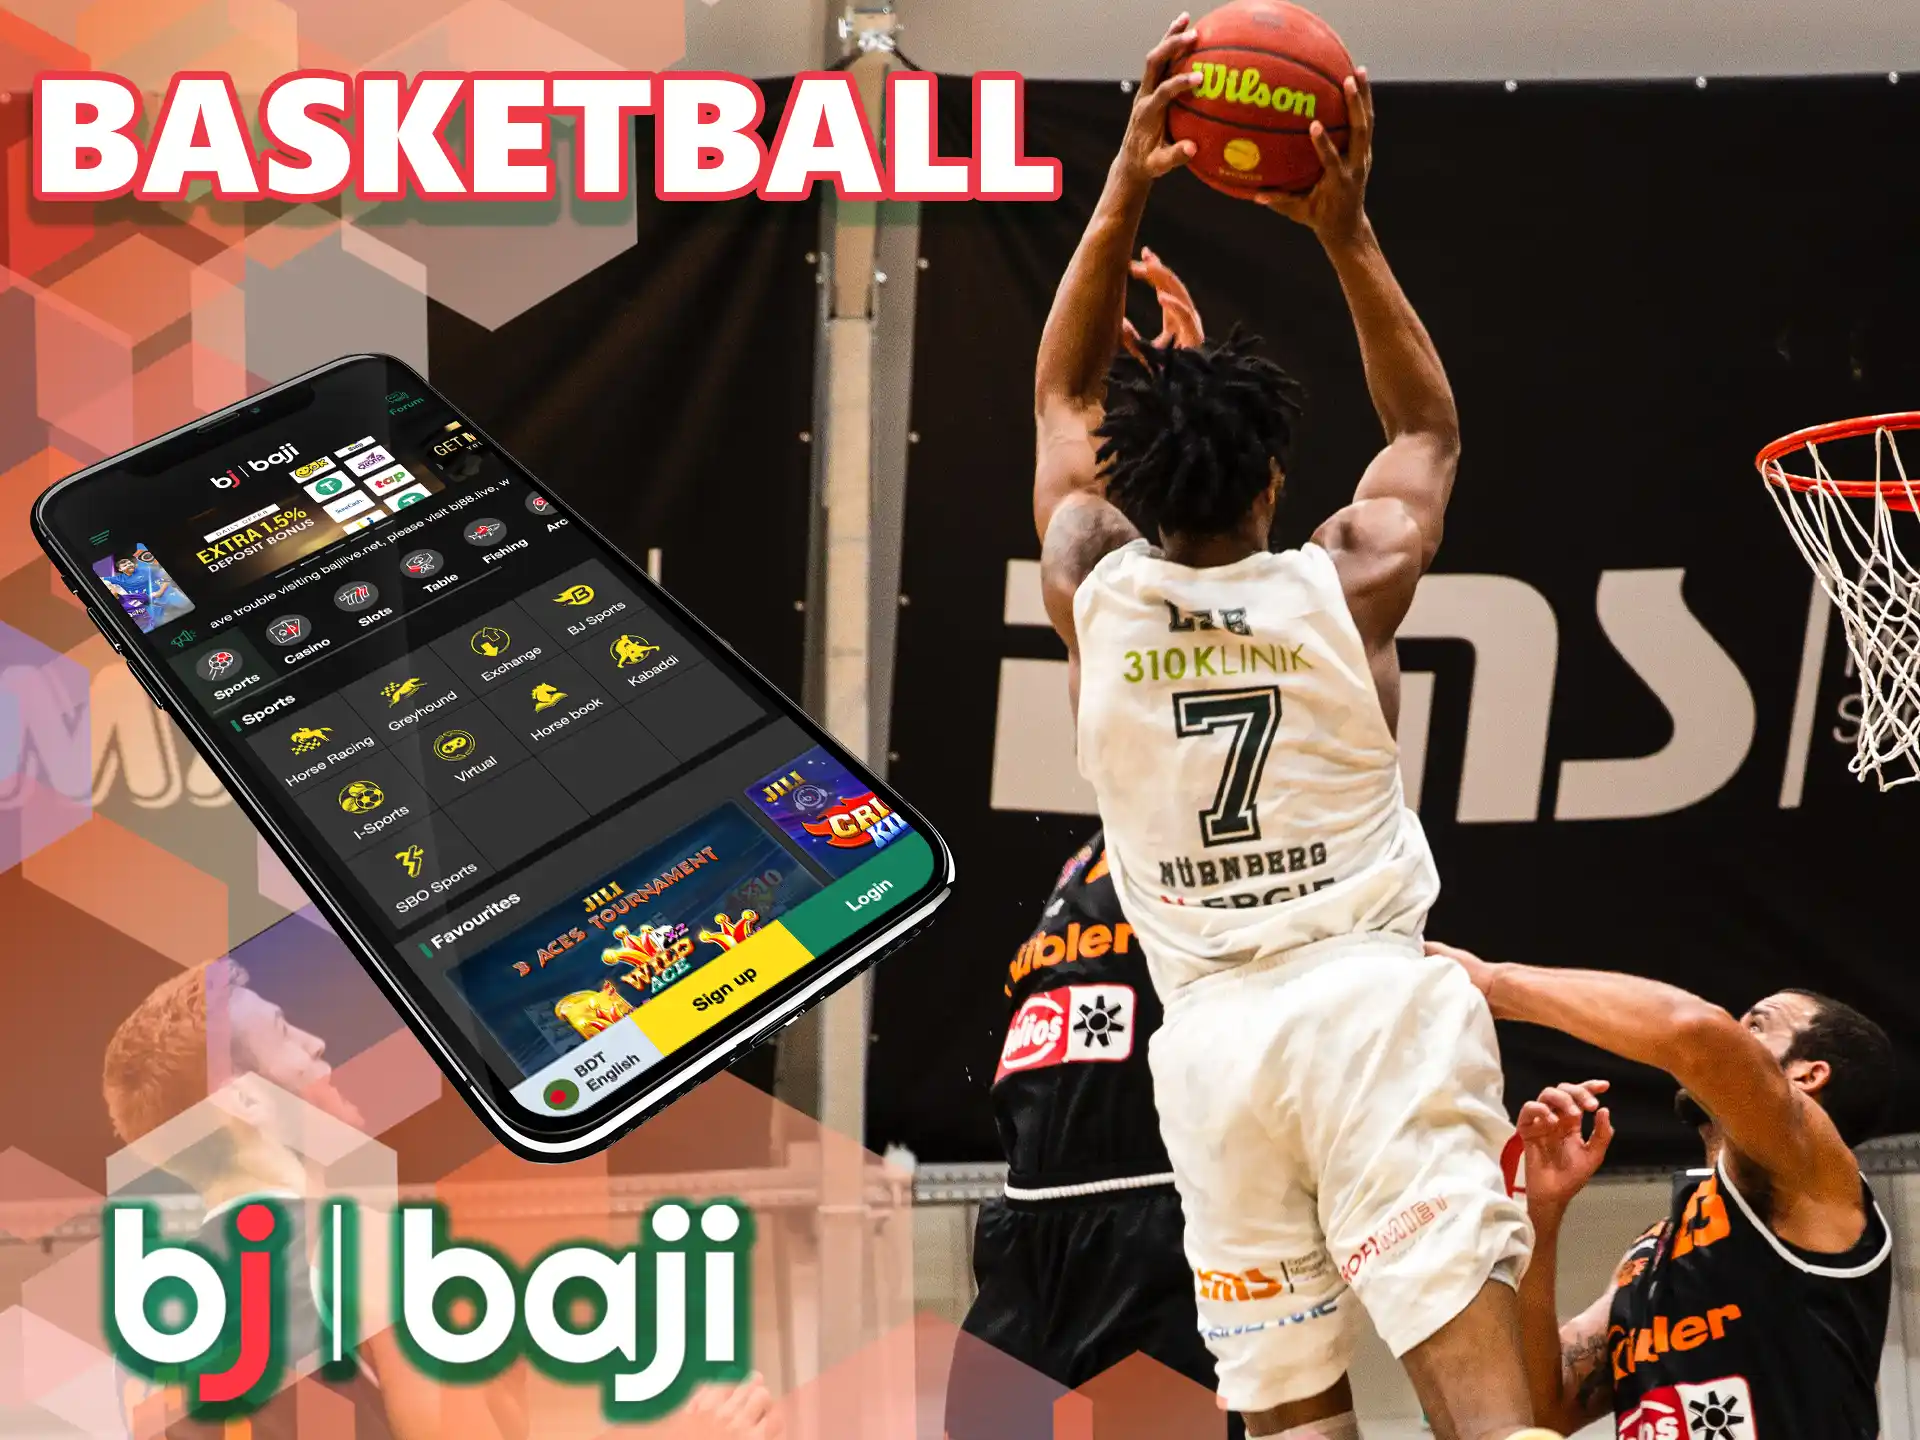 If you are a sports fan, there are tons of interesting events waiting for you in this category, on which you can place bets in the Baji app.